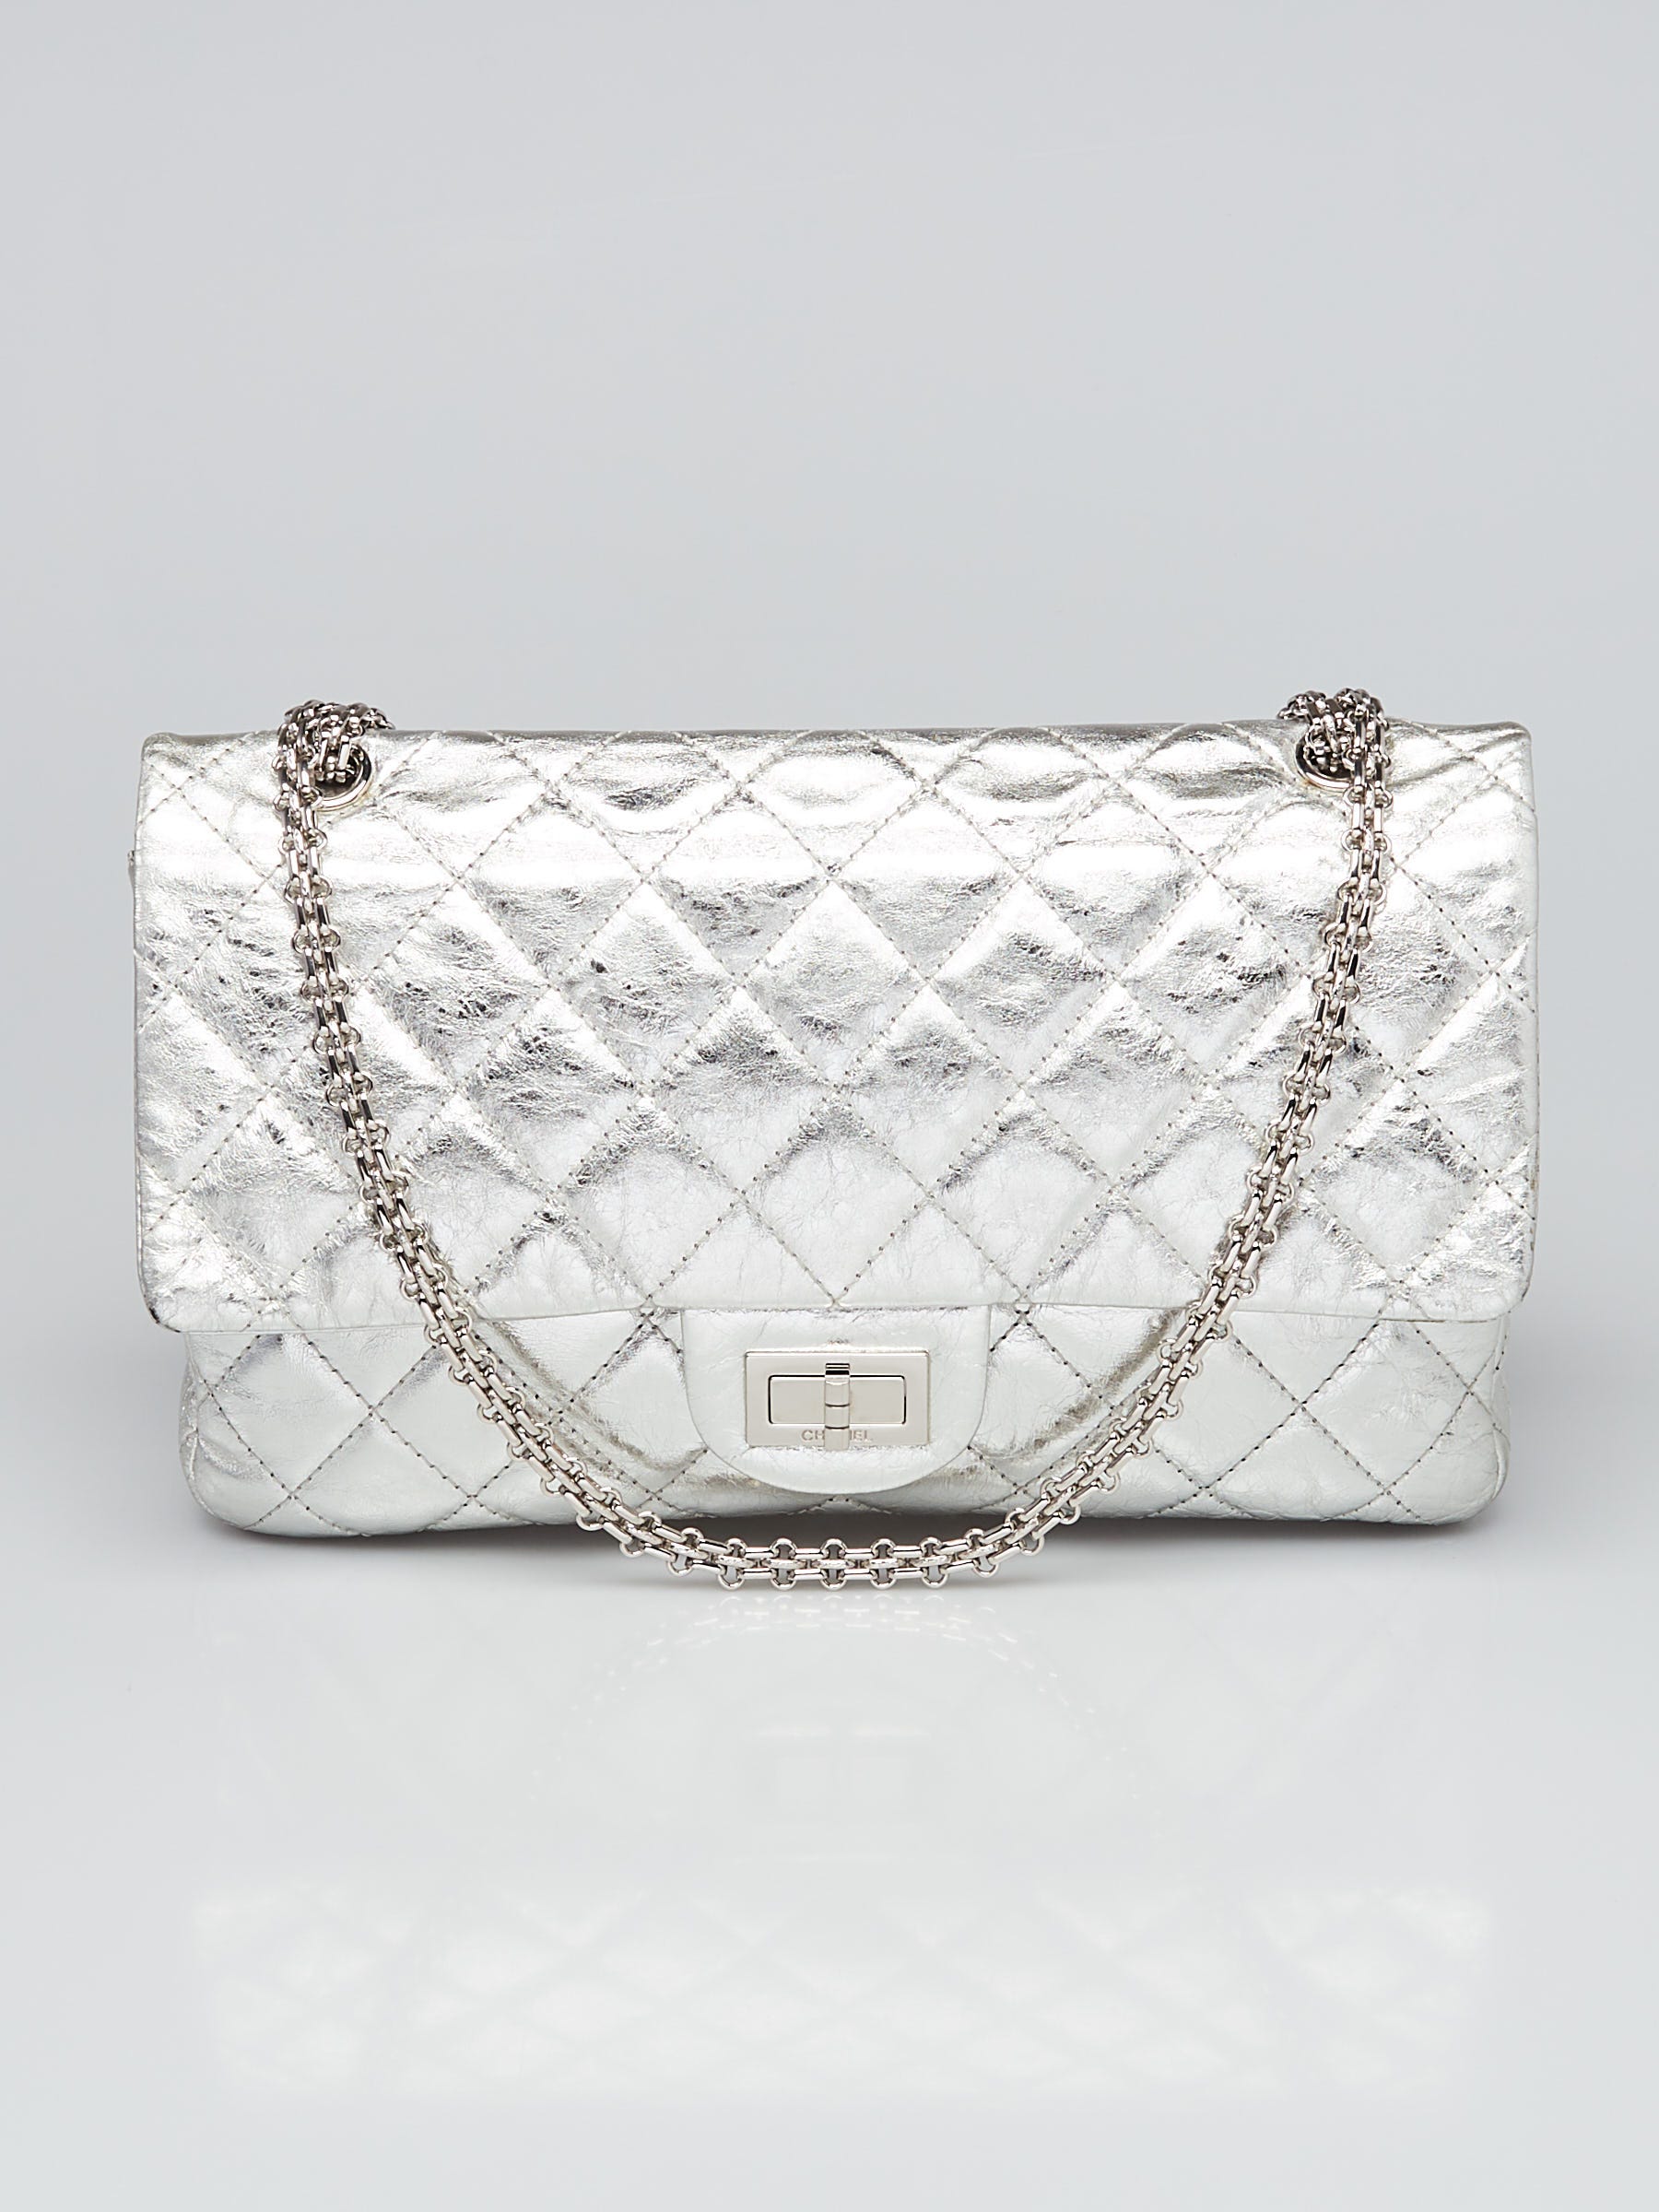 Chanel timeless bag small size black Lambskin and silver tone